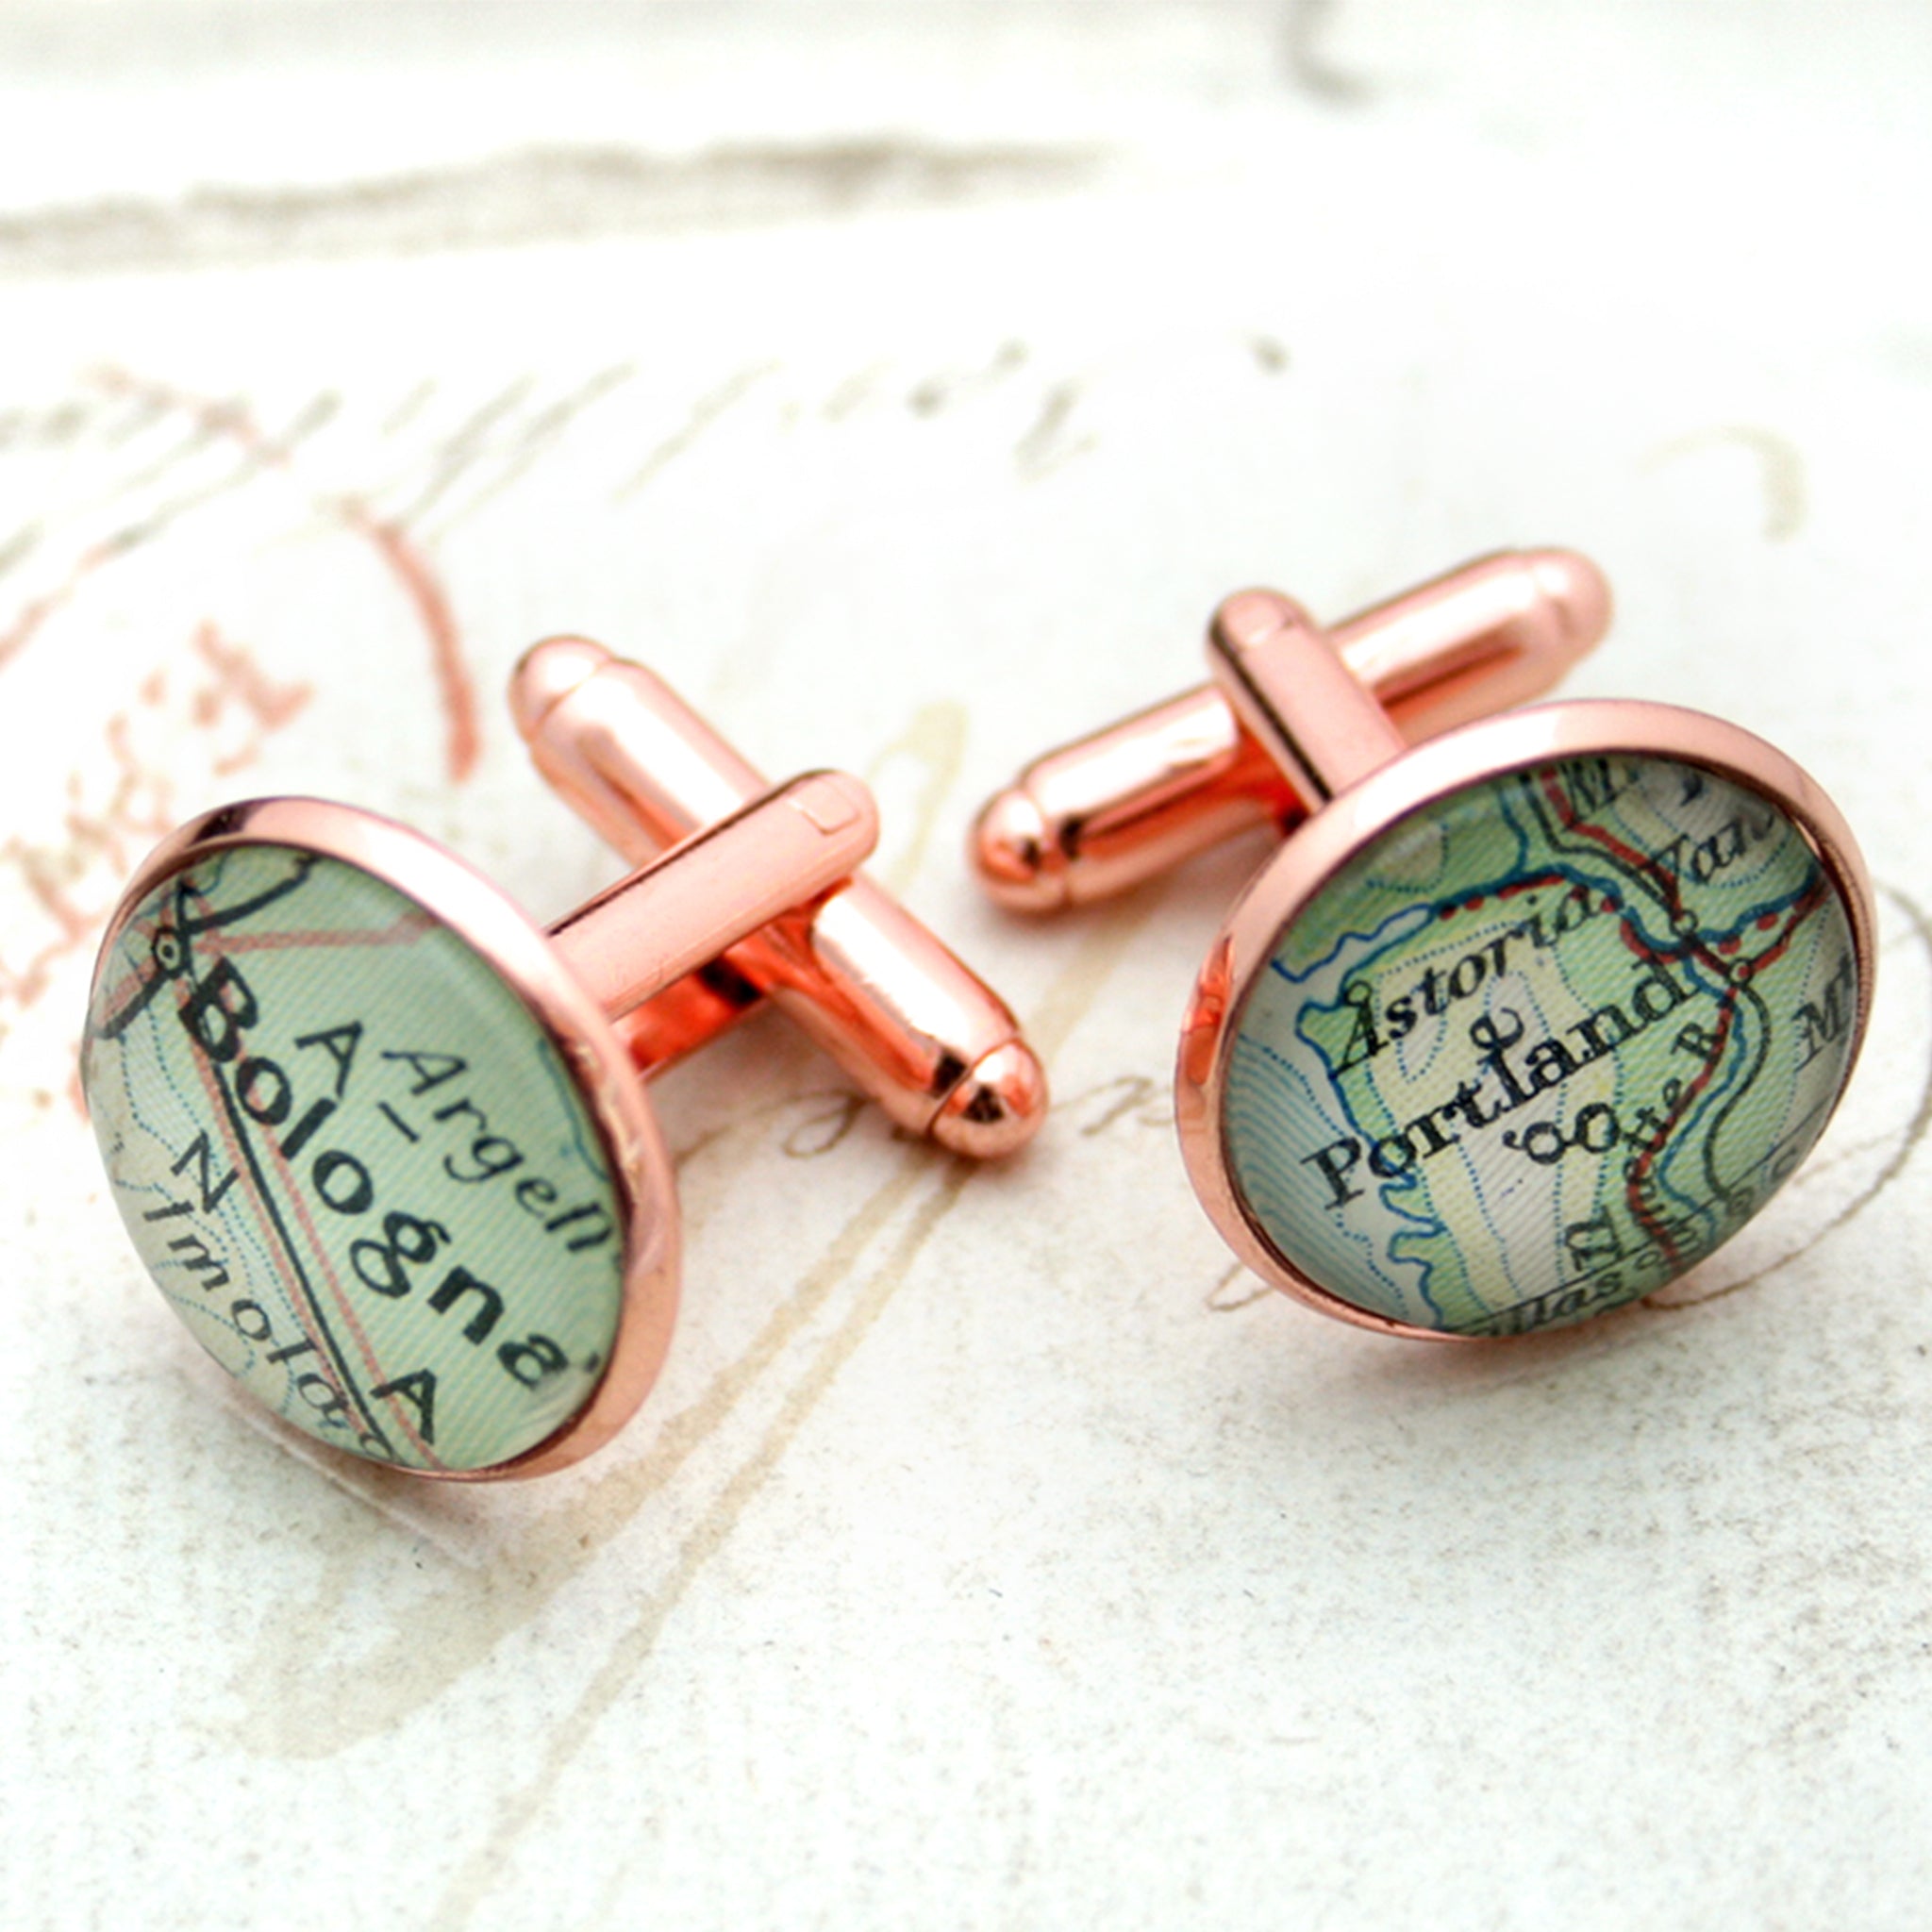 Personalised map cufflinks in rose gold color featuring Bologna and Portland